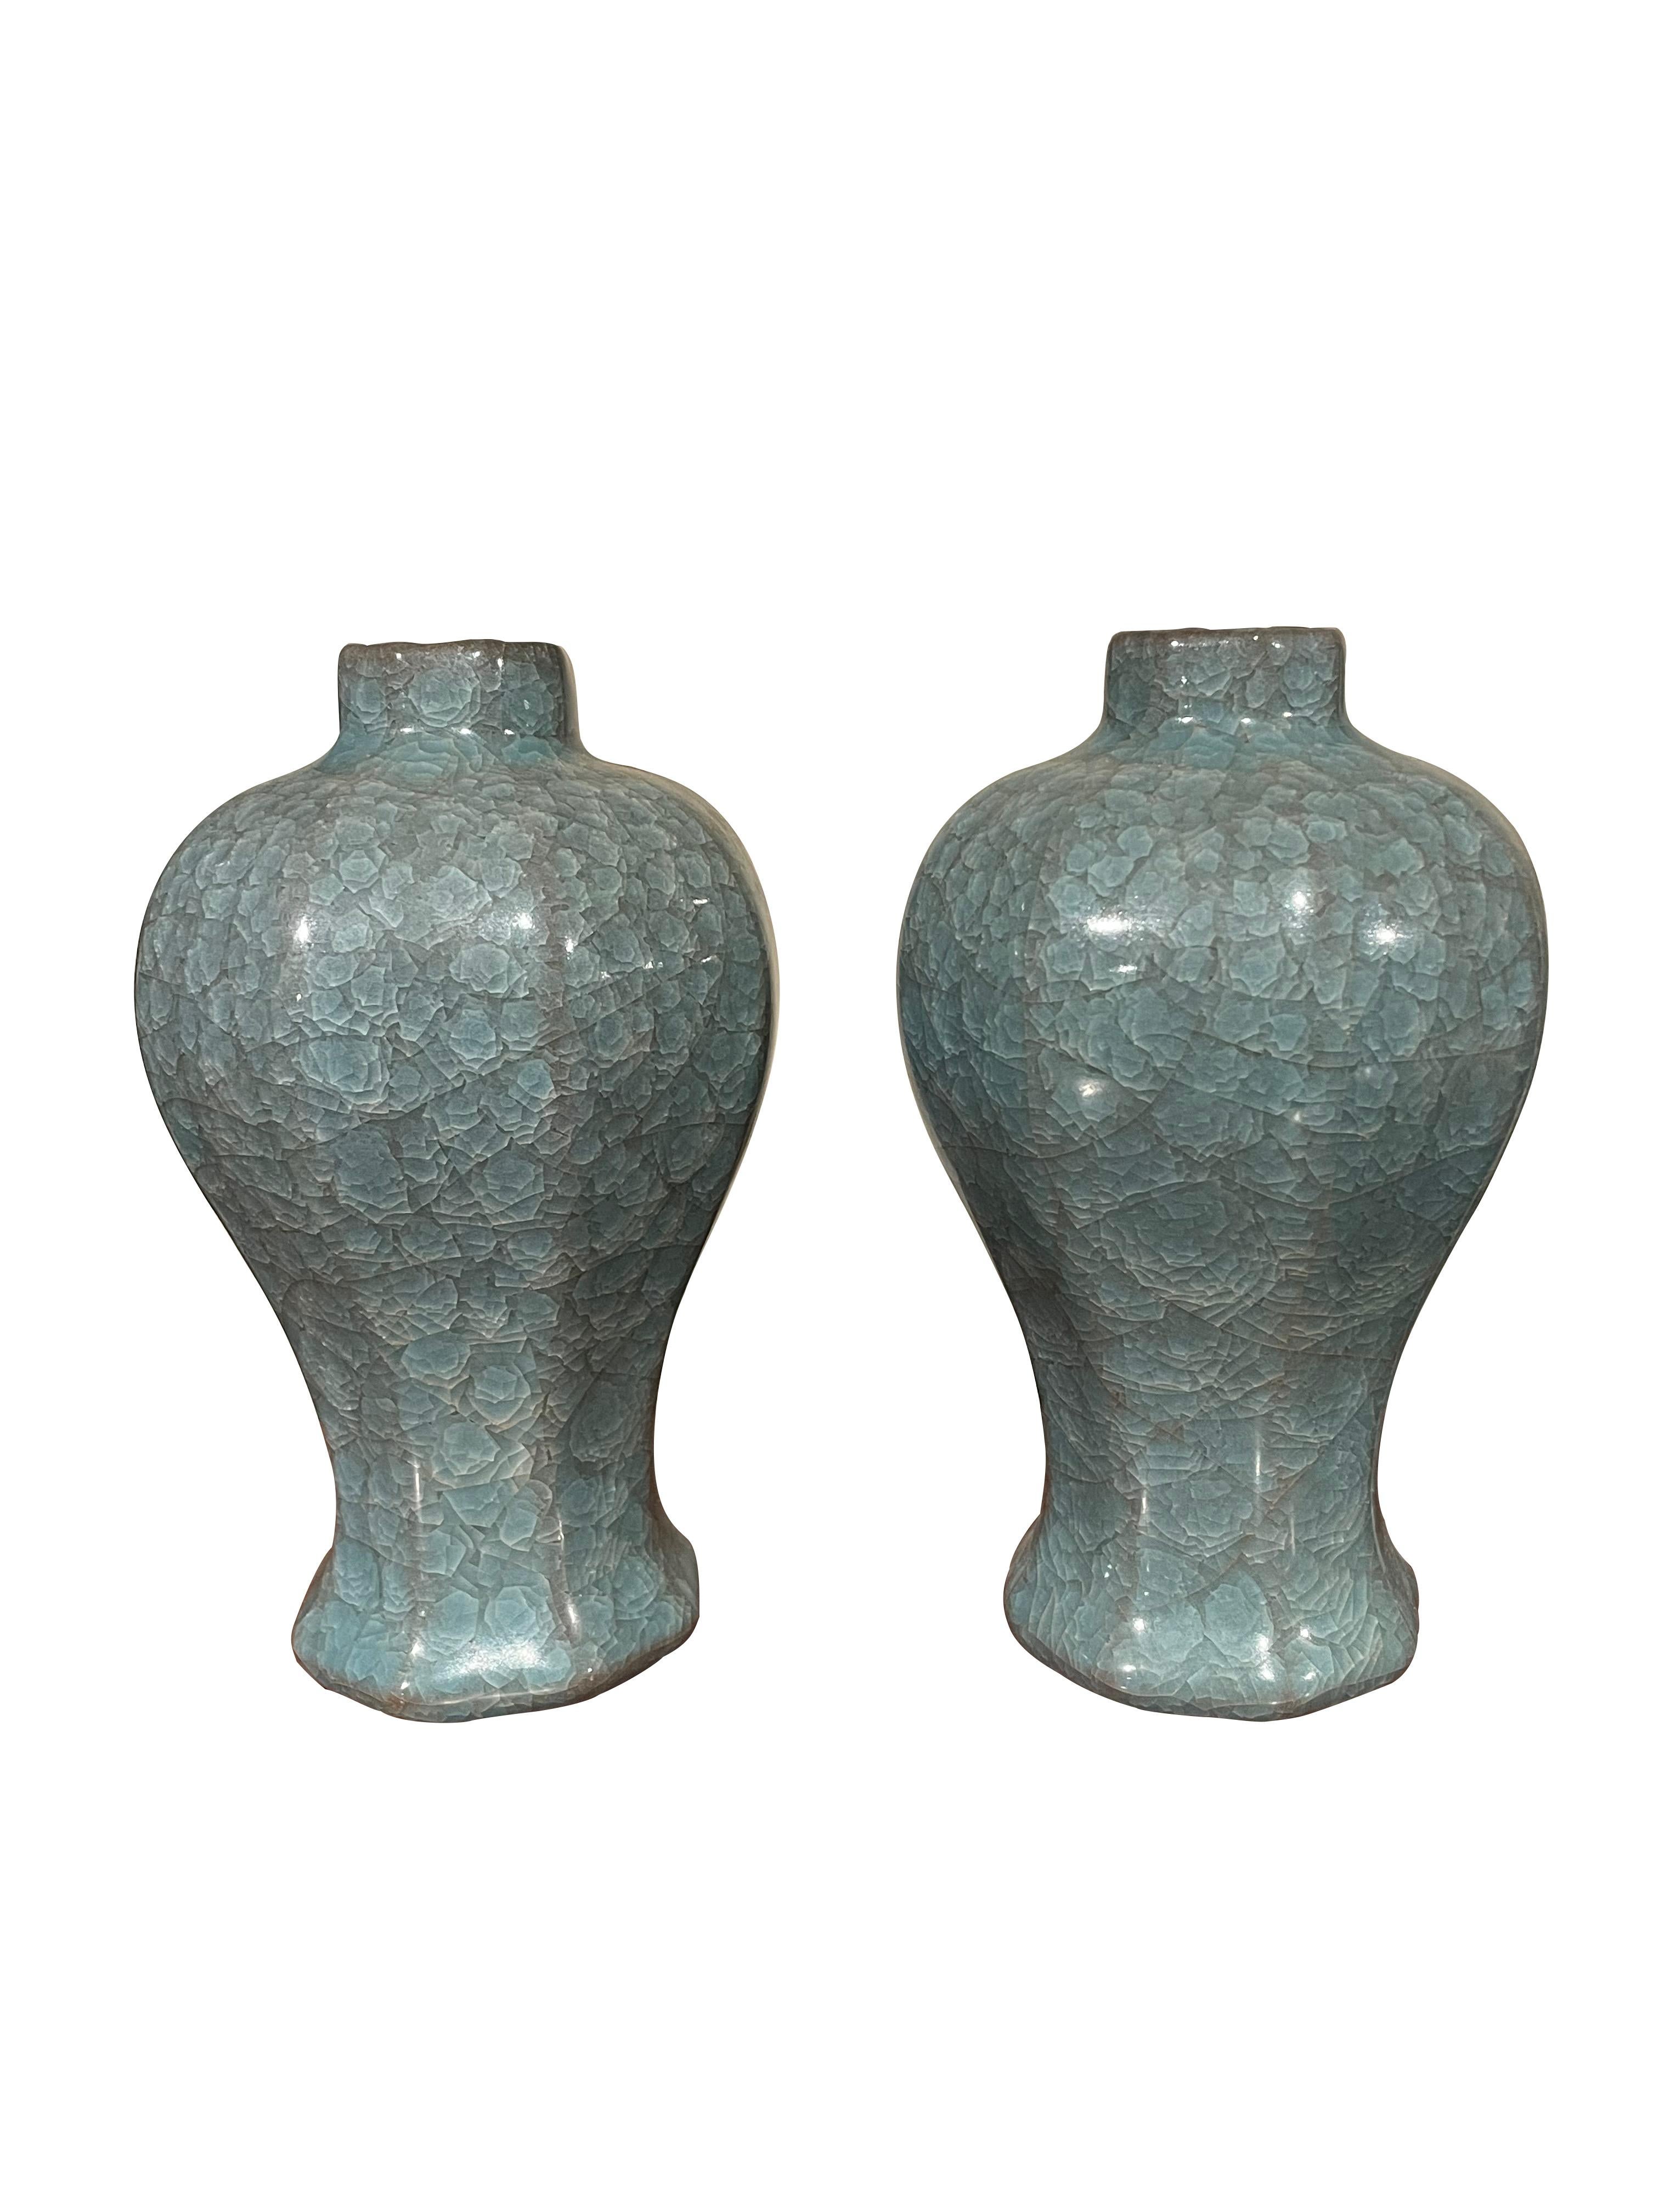 Contemporary Chinese blue vase with crackle glaze.
Hexagonal shape with small spout opening.
Two available and sold individually.
From a large collection with varying shapes and sizes.
ARRIVING APRIL